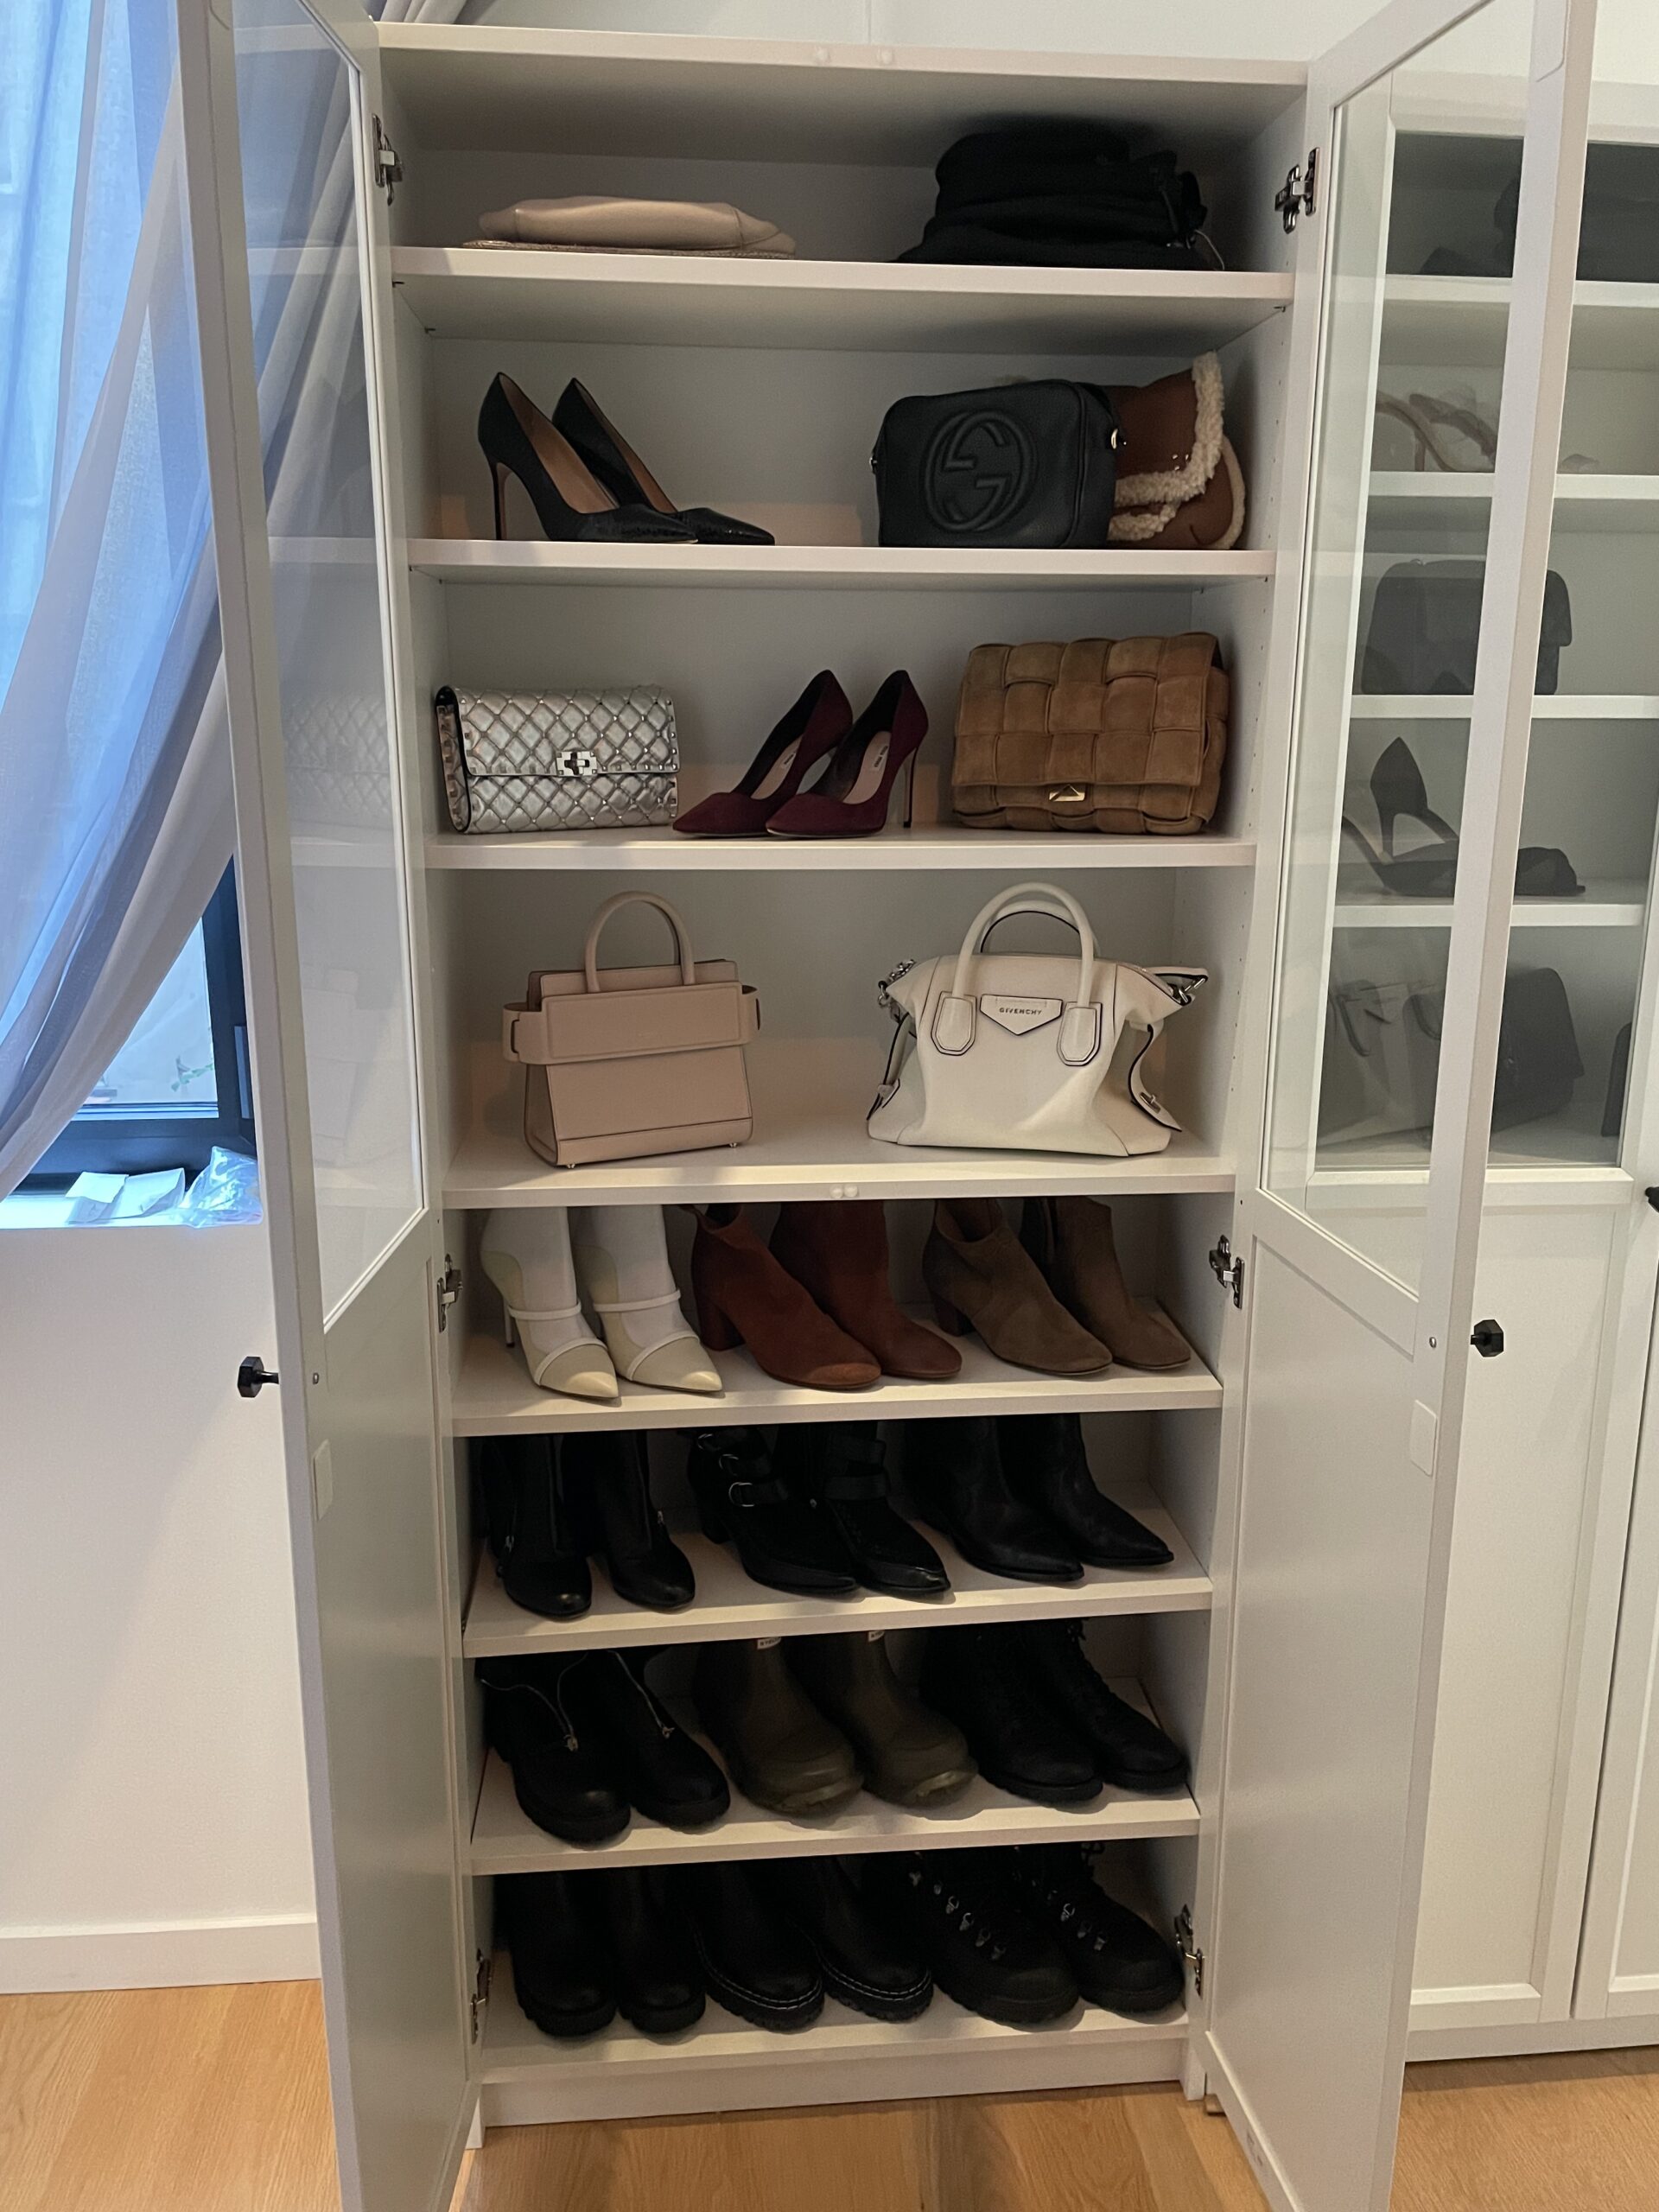 Styled shoes and bags in closet